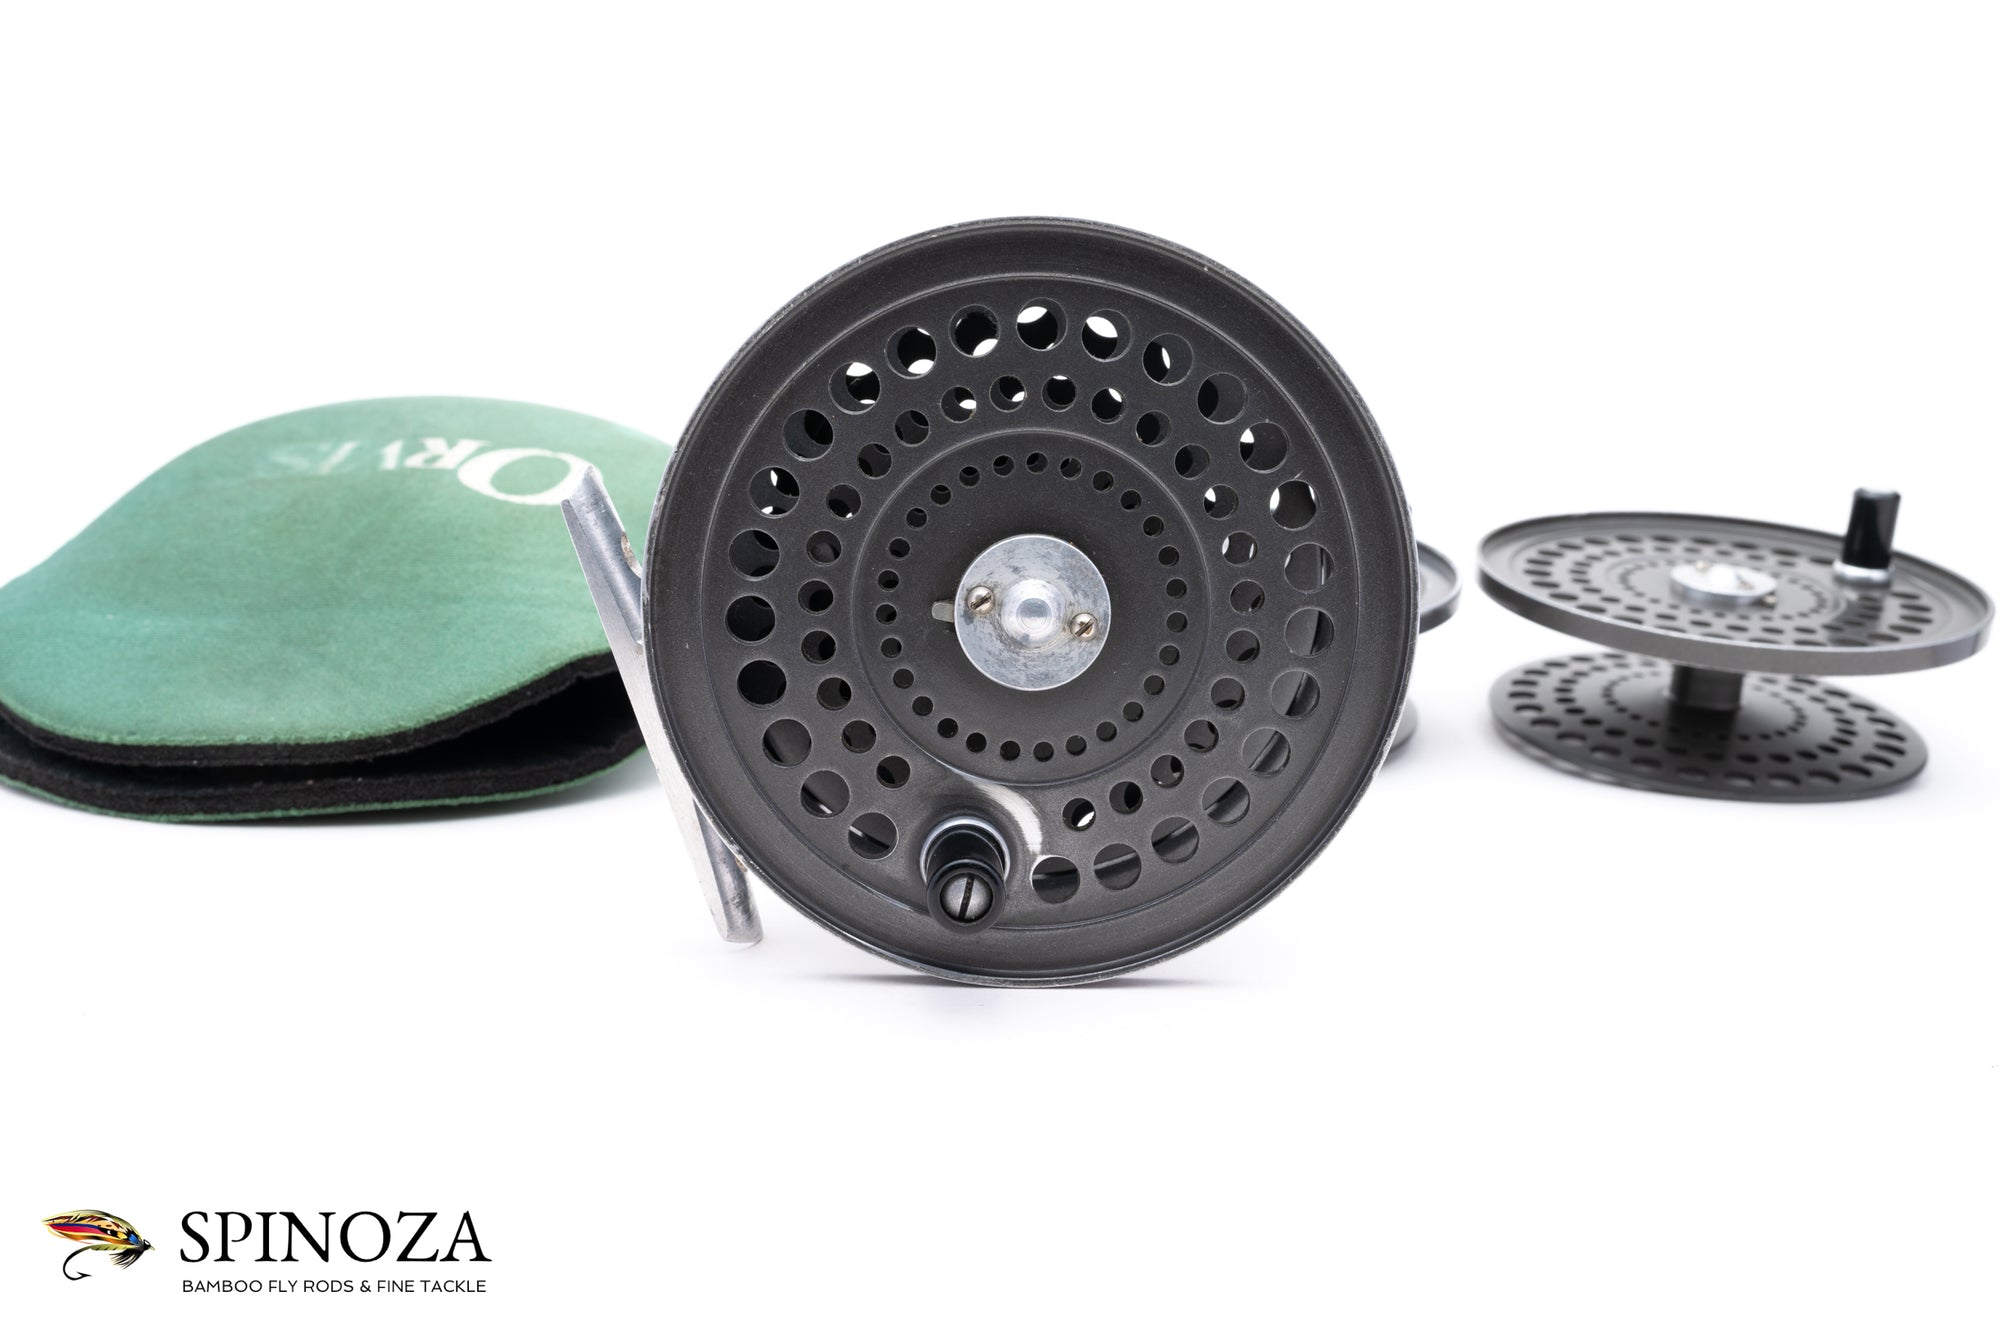 Orvis Fly Fishing Reels for Sale